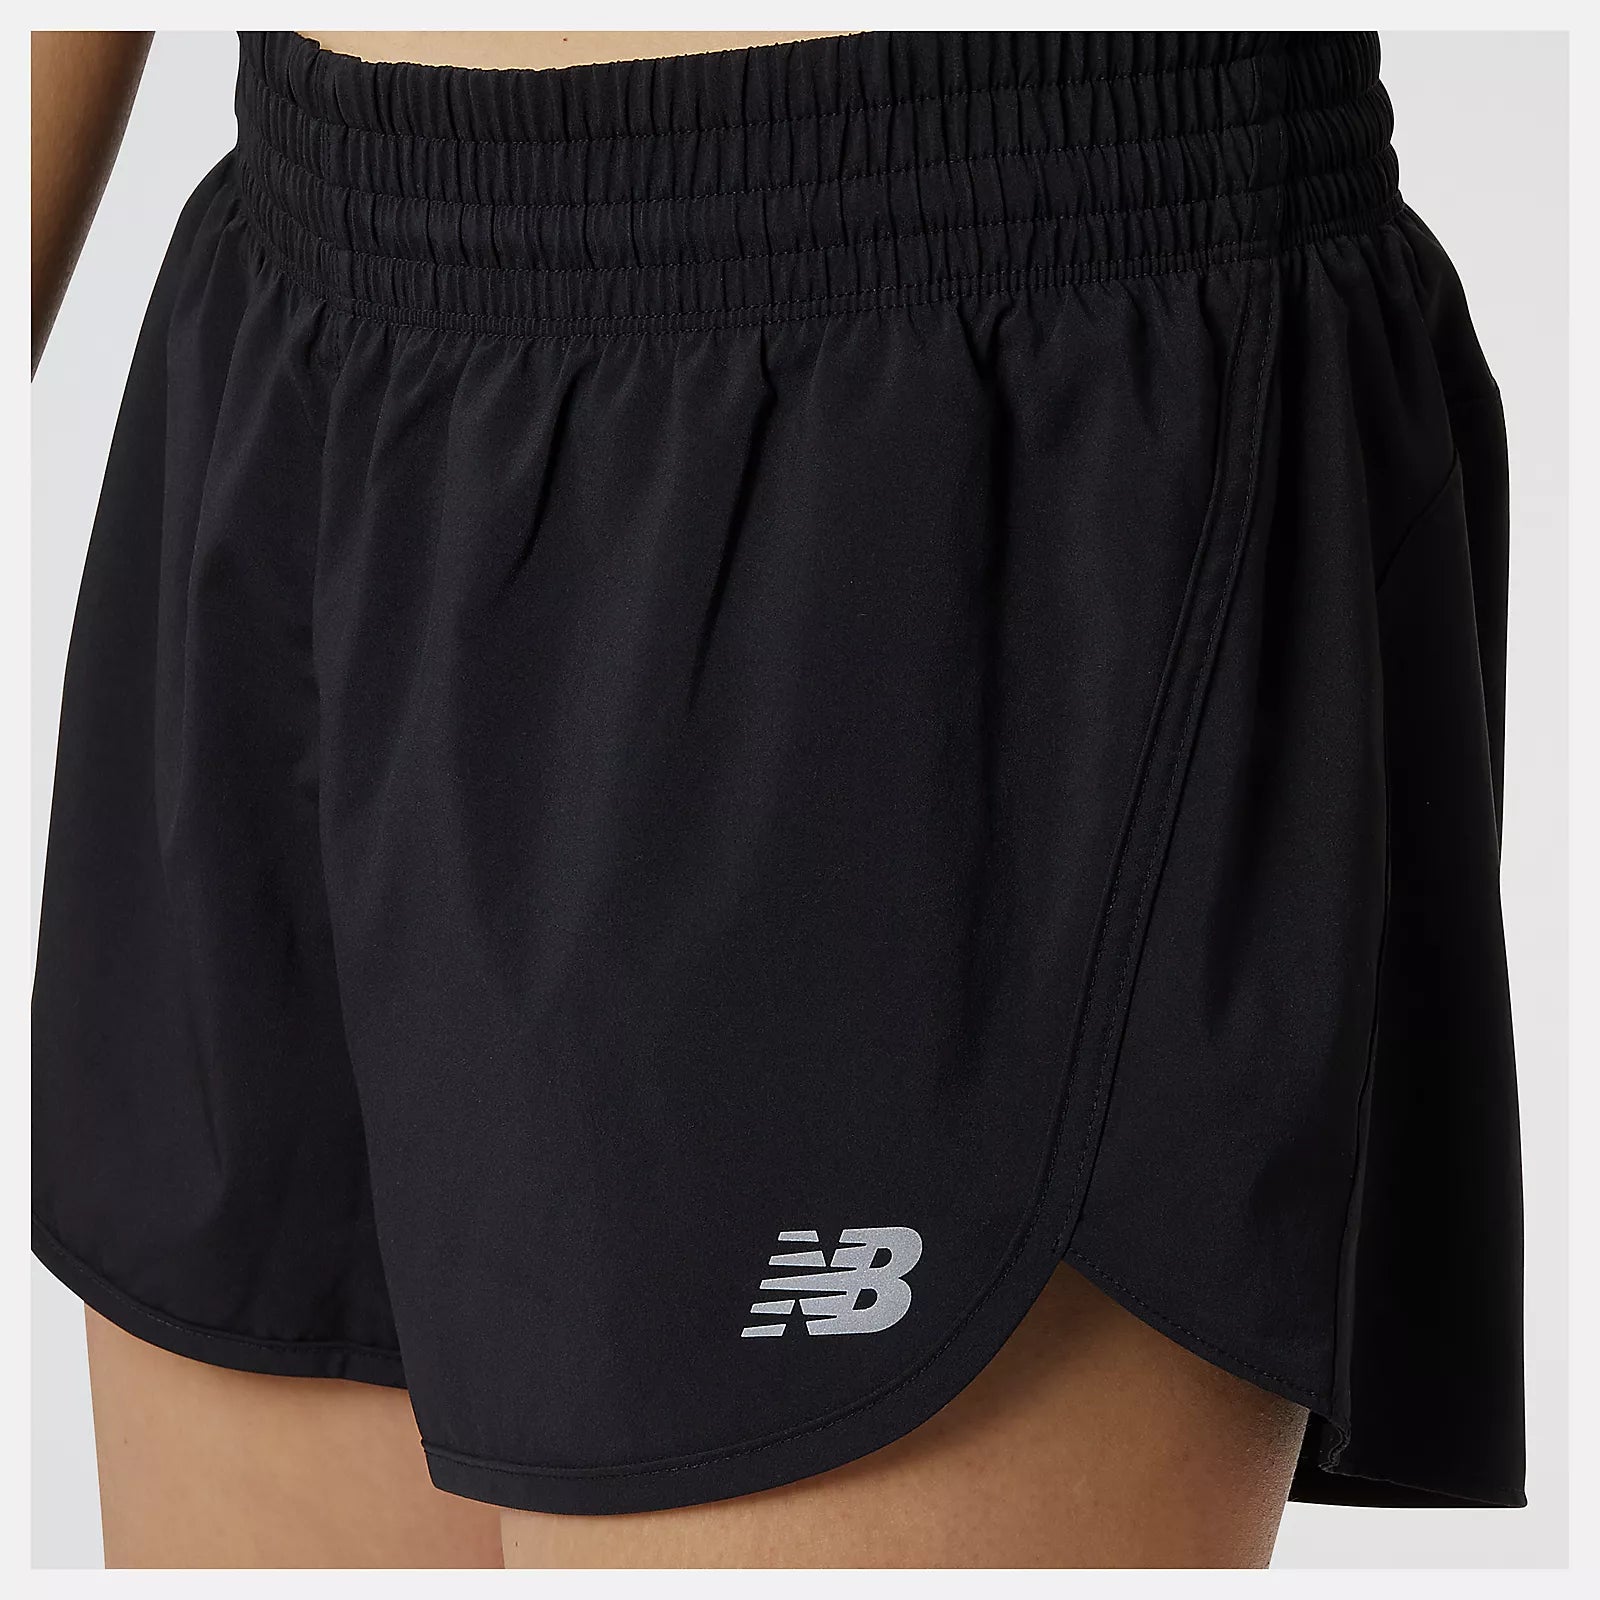 XL Sports - The New Balance Ladies Accel Tights is on